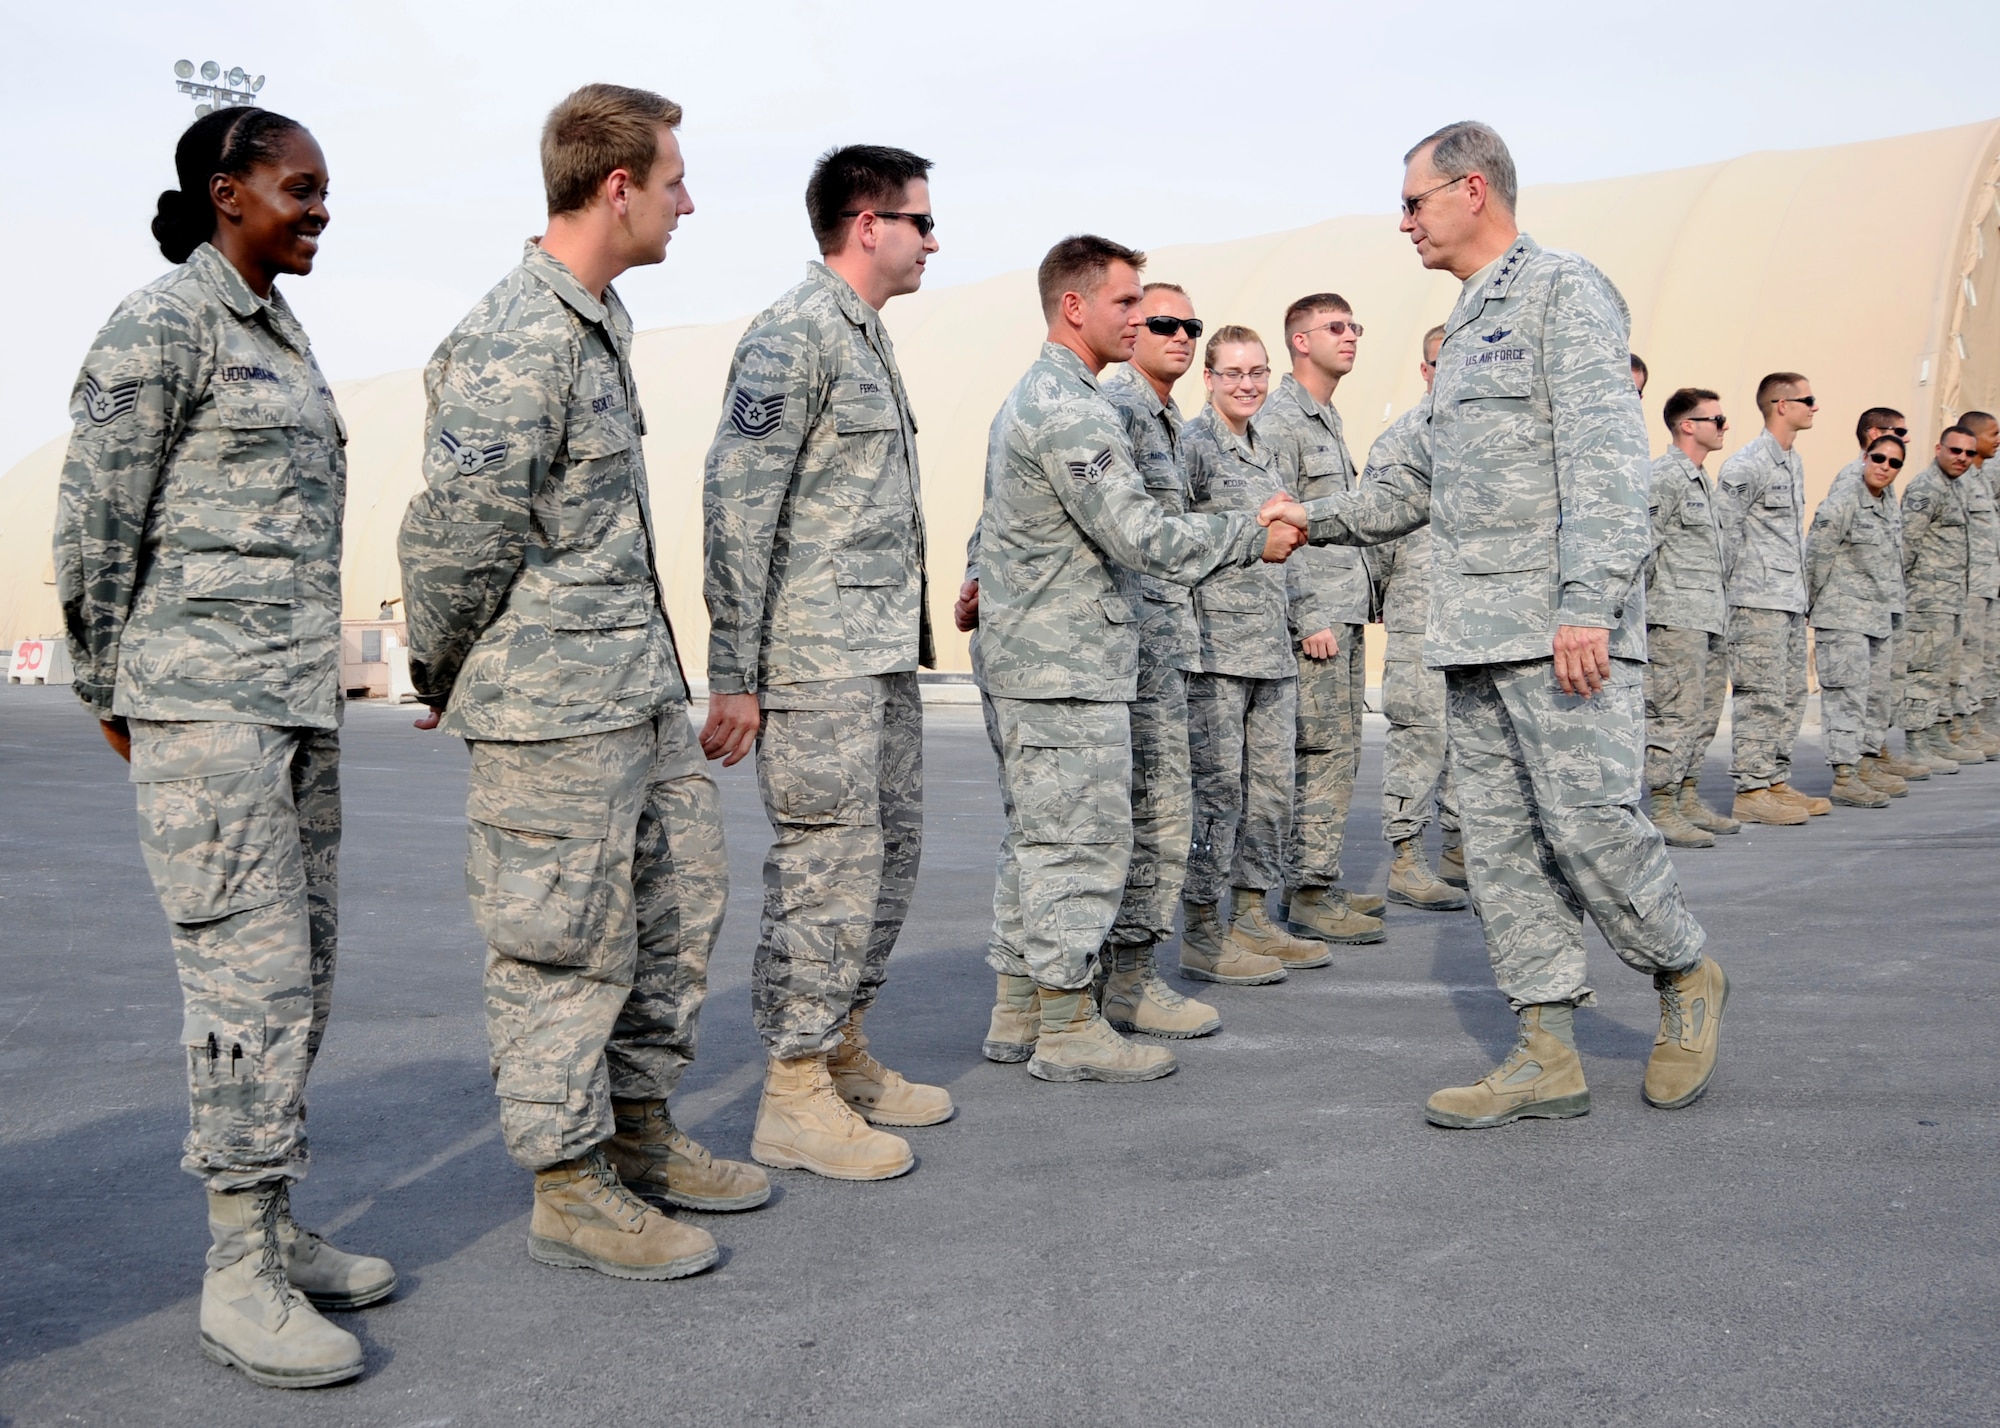 Gen. William M. Fraser III greets Airmen assigned to the 8th Expeditionary Air Mobility Squadron during a visit to the 379th Air Expeditionary Wing in Southwest Asia, Nov. 29, 2013. The general’s visit was to share the Thanksgiving holiday with deployed troops and thank them for their service and sacrifice. Fraser is the commander of U.S. Transportation Command. (U.S. Air Force photo/Senior Airman Bahja J. Jones)



